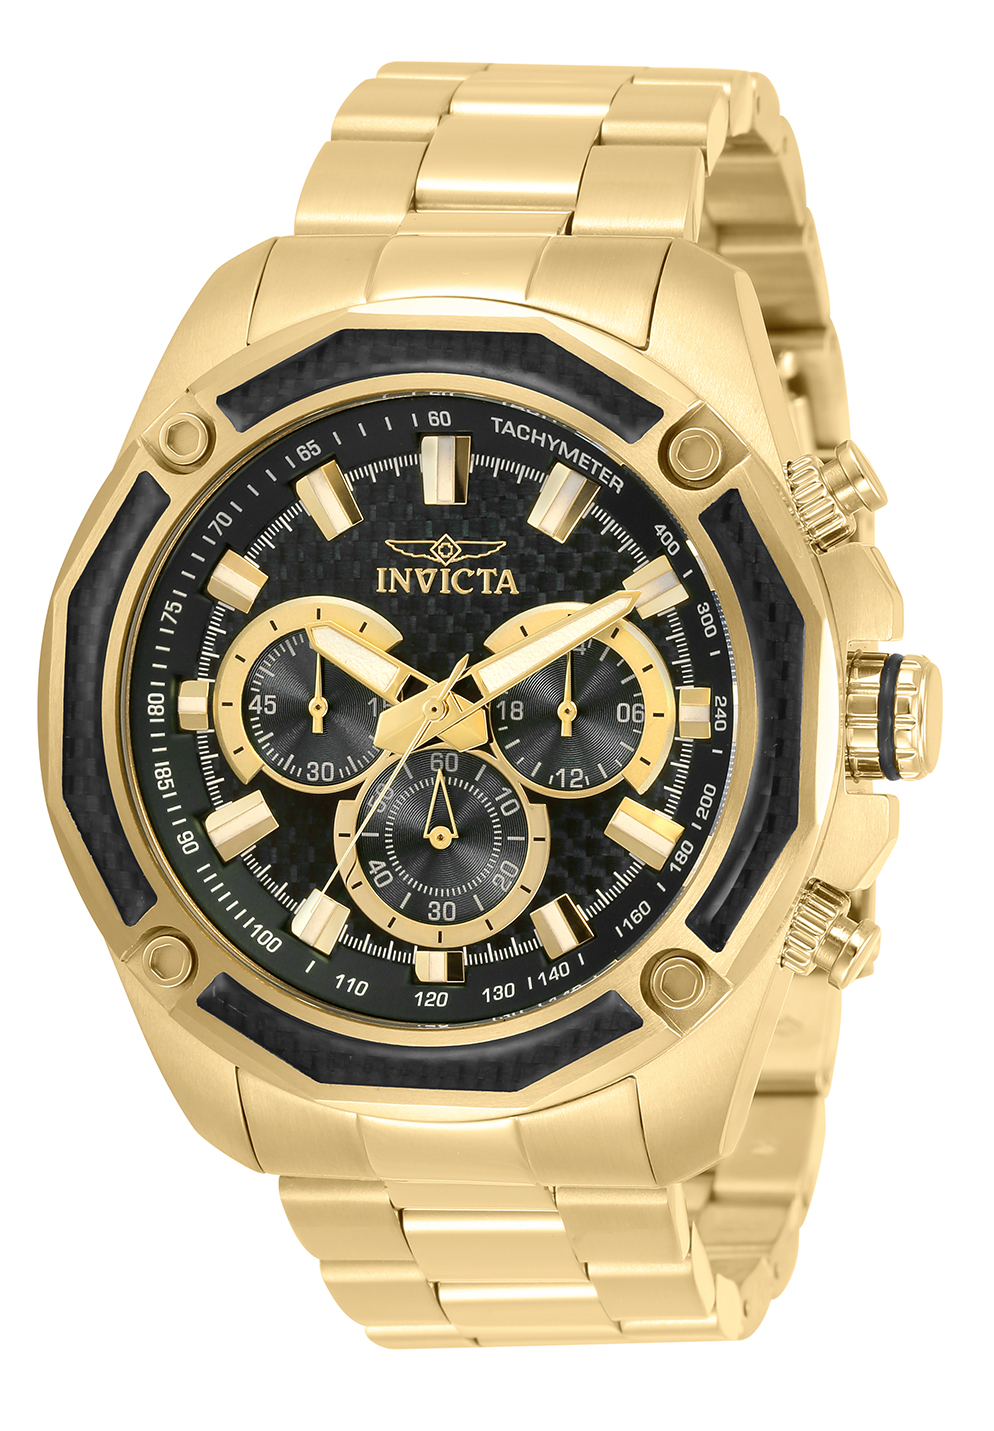 Invicta Aviator Quartz Mens Watch - 48mm Stainless Steel Case, Stainless Steel Band, Gold (34158)